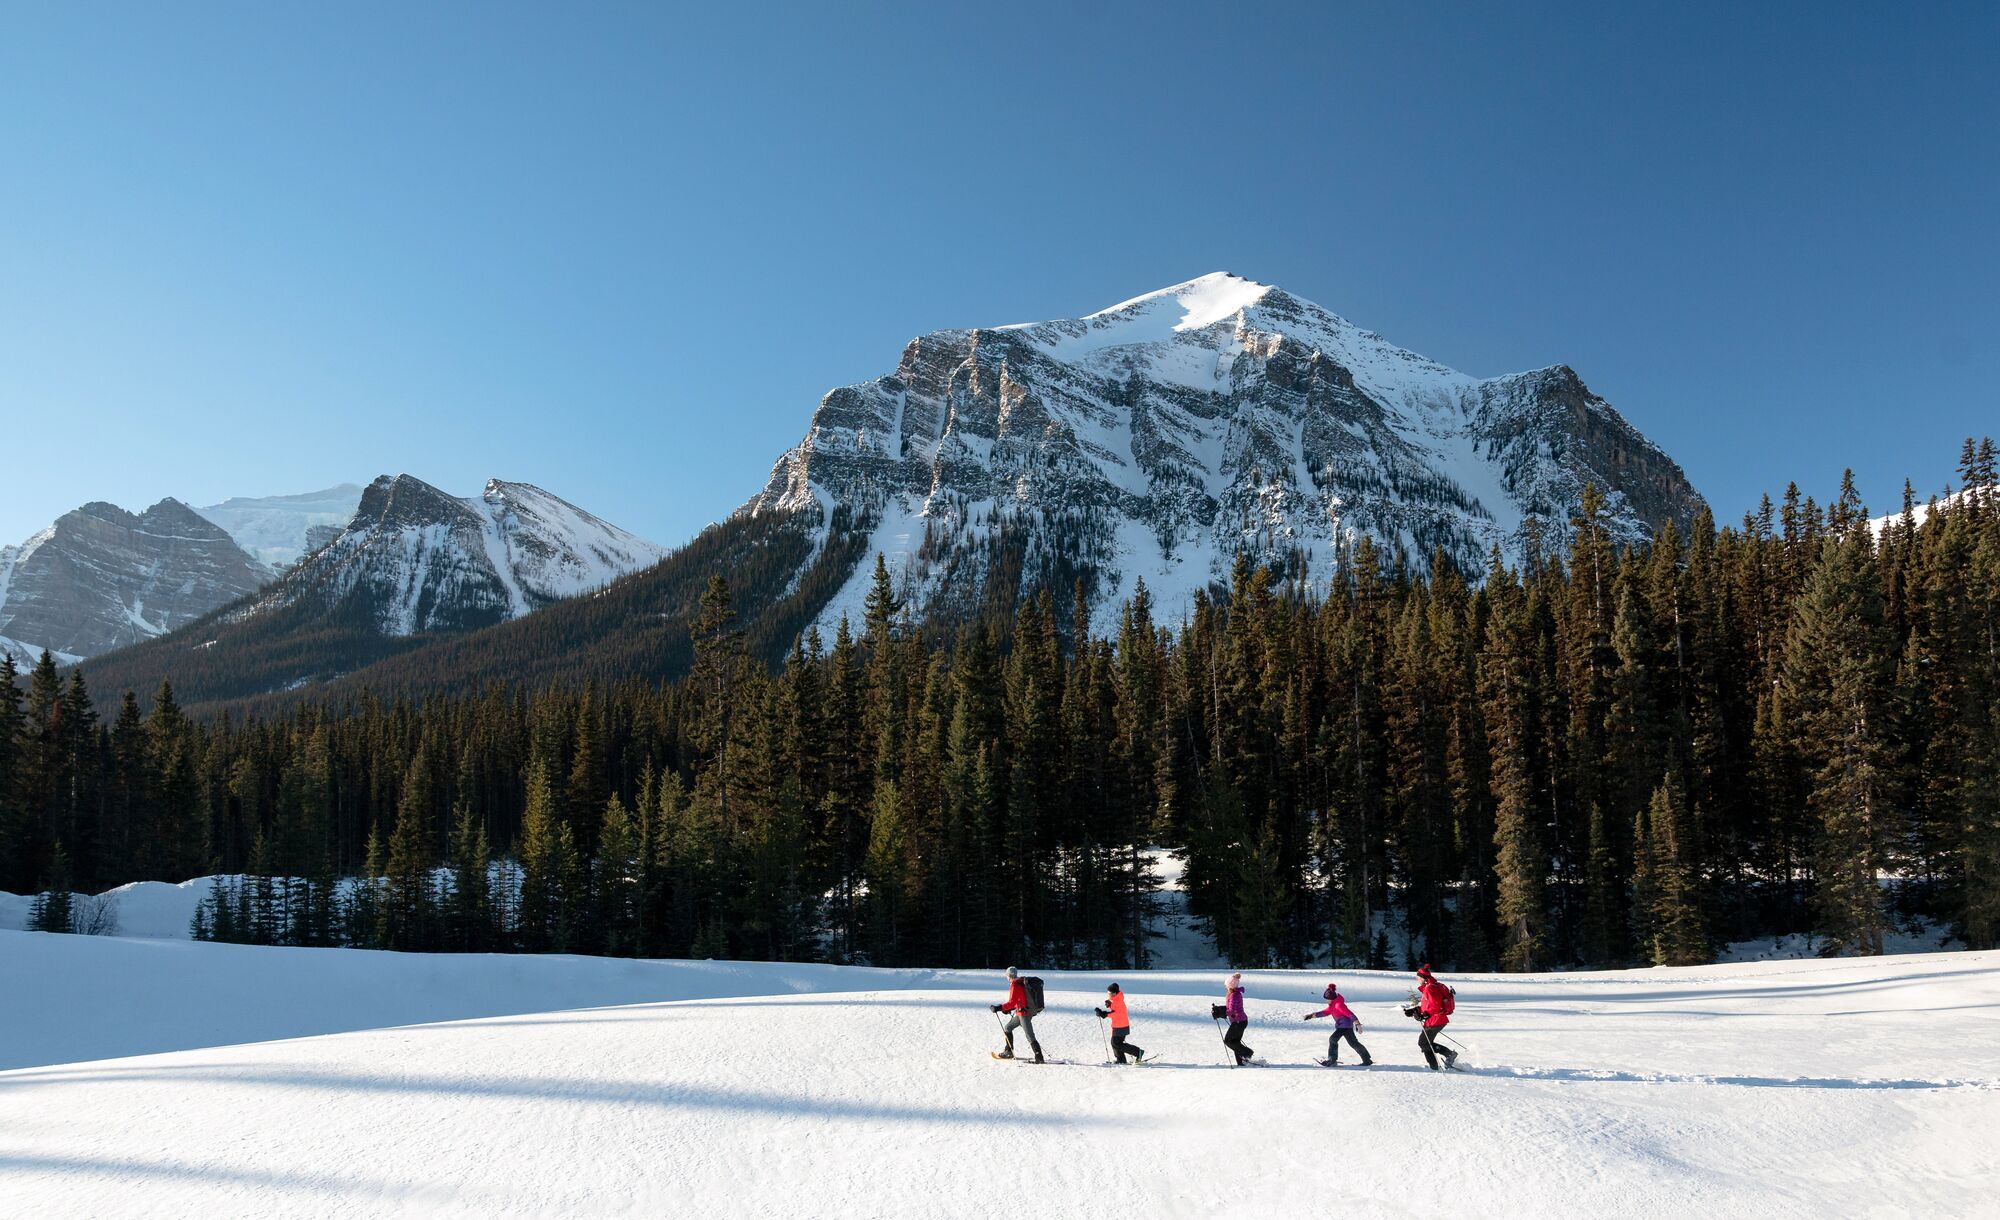 A snowshoe guide brings a group of snowshoers along at the base of Mount Fairview in Lake Louise in Banff National Park.